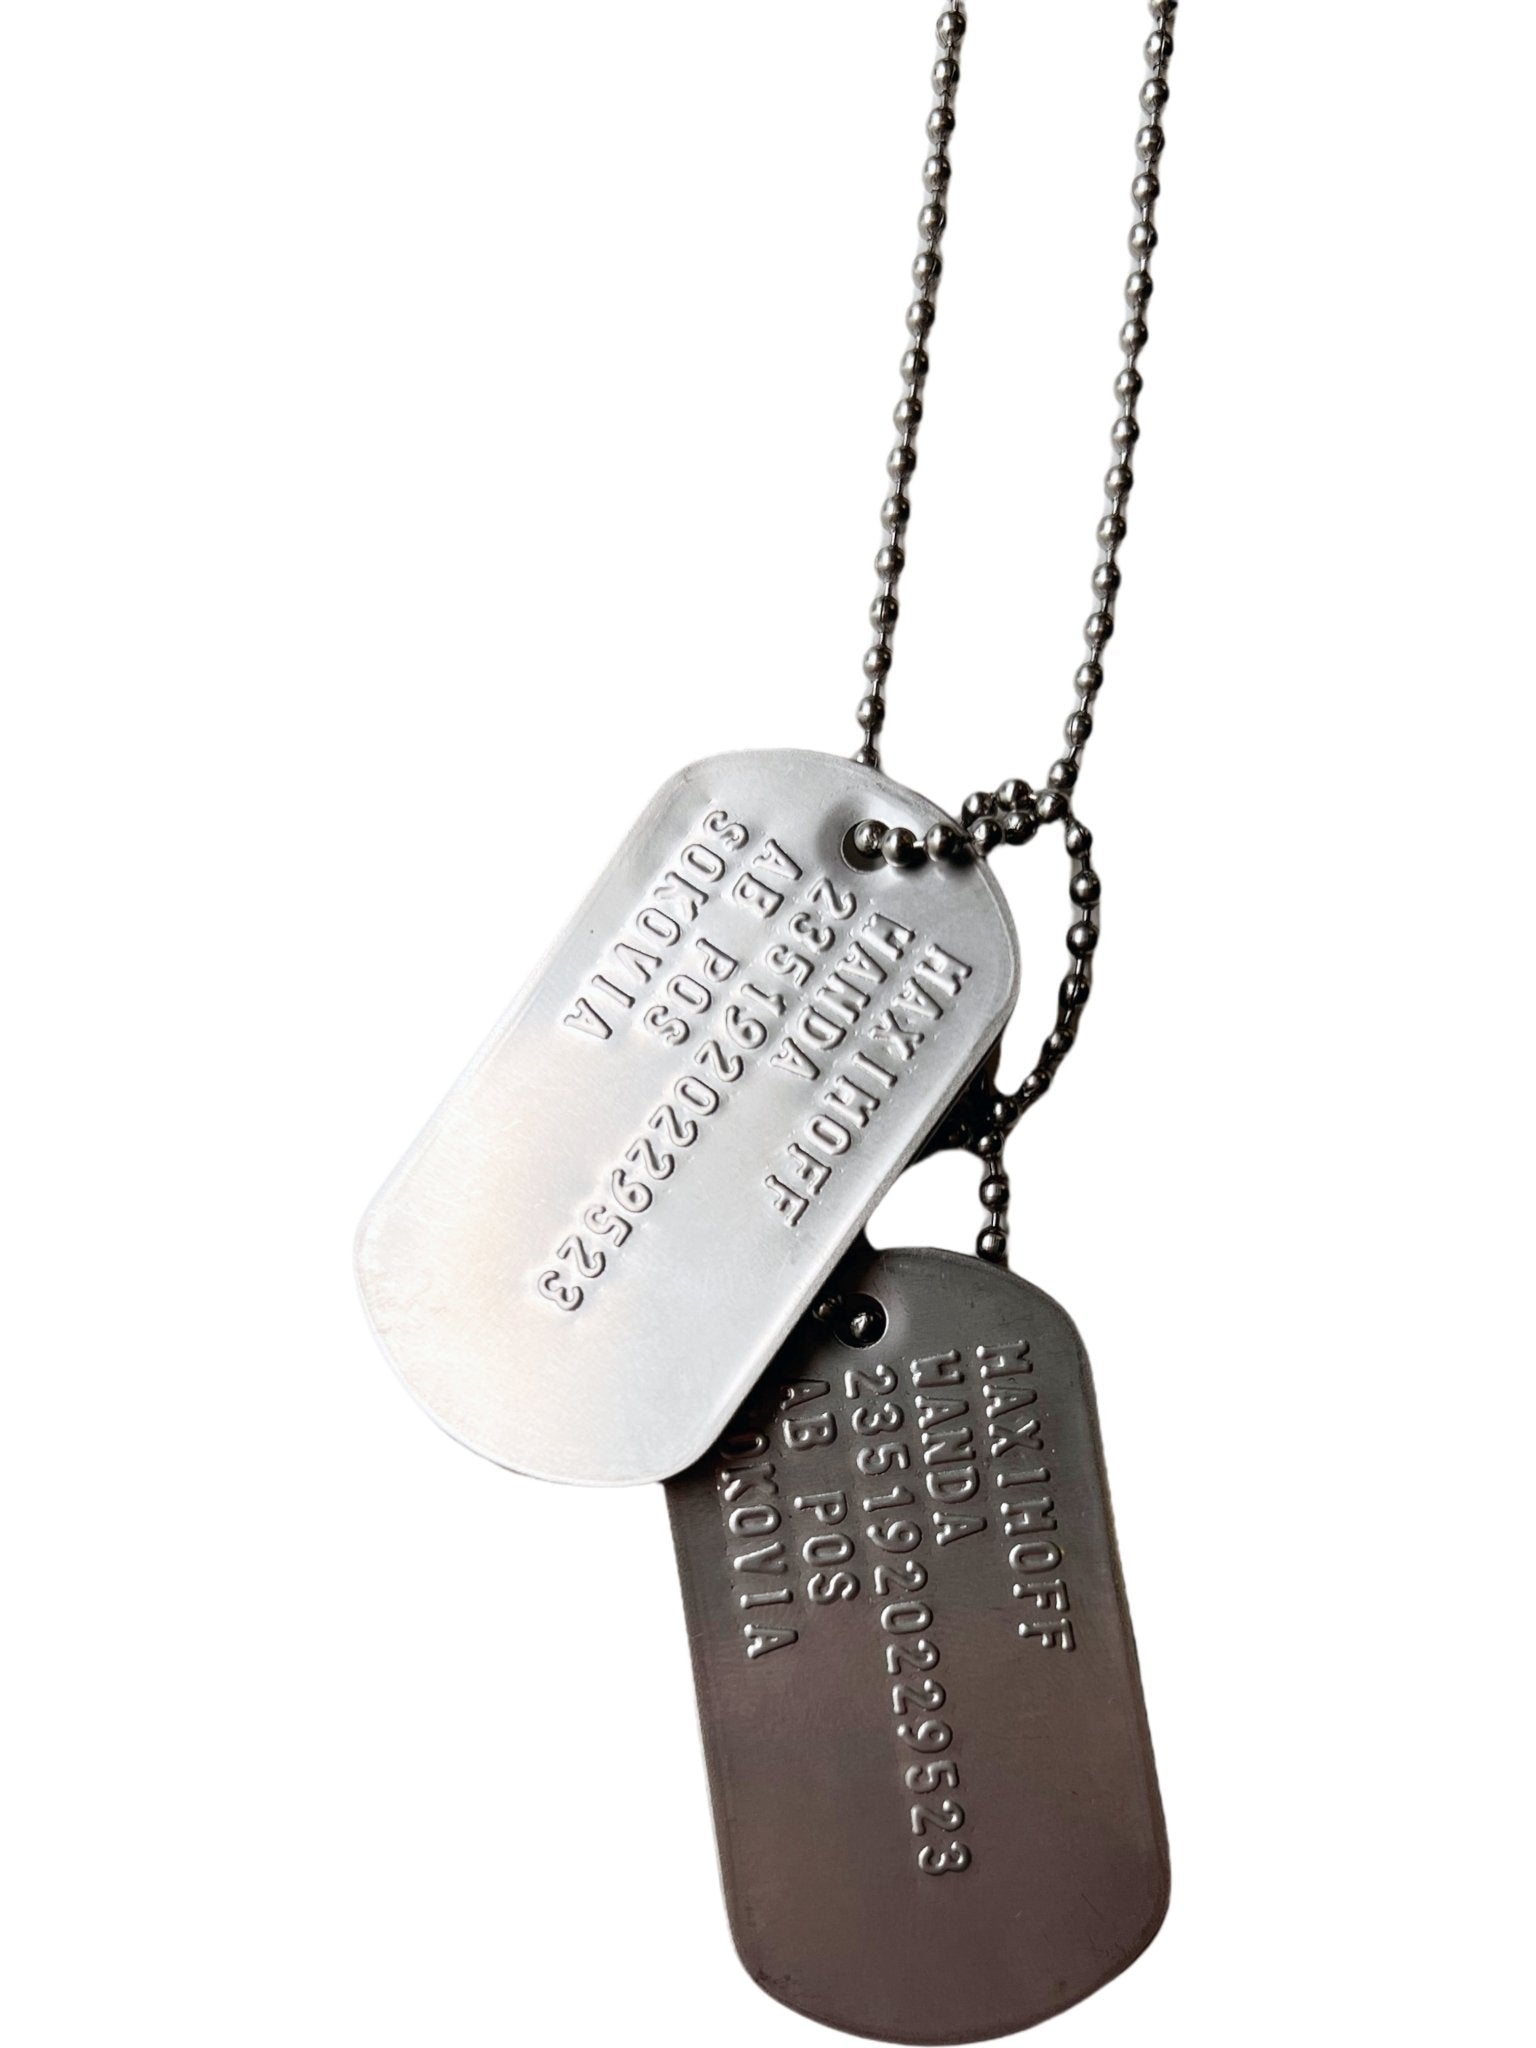 WANDA 'Scarlet Witch' MAXIMOFF Military Dog Tags - Costume Cosplay Prop Replica - Stainless Steel Chains Included - TheDogTagCo